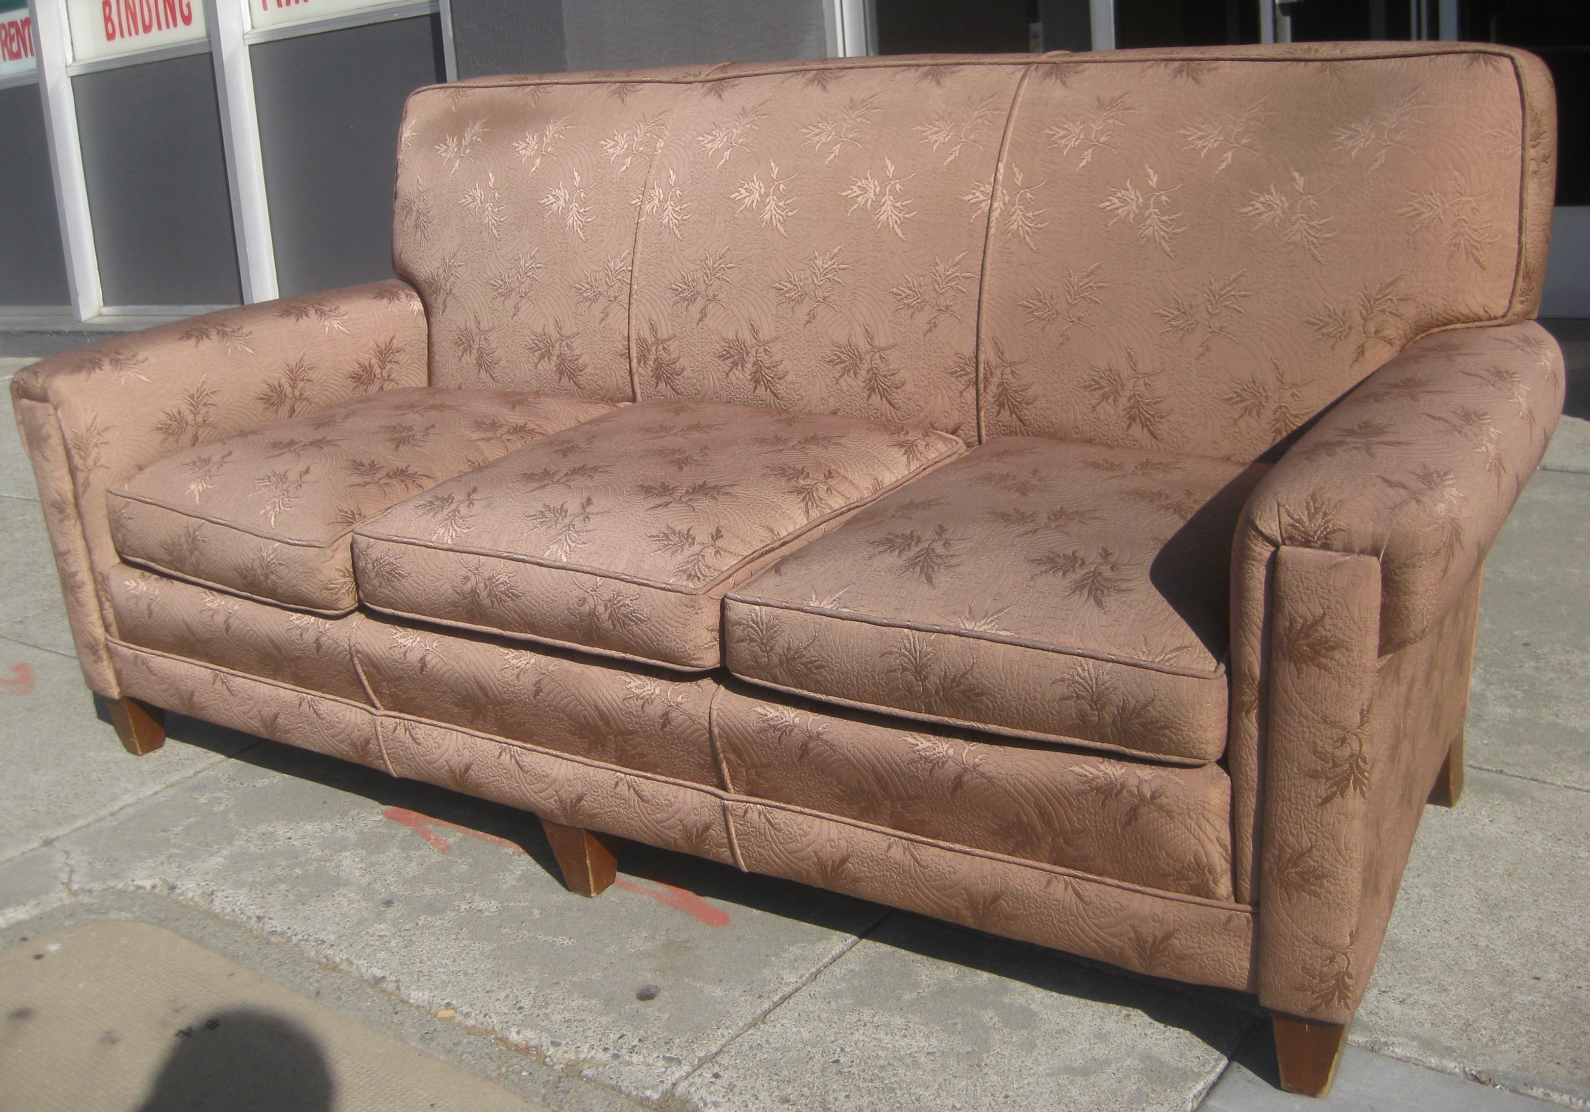 1940's sofa bed